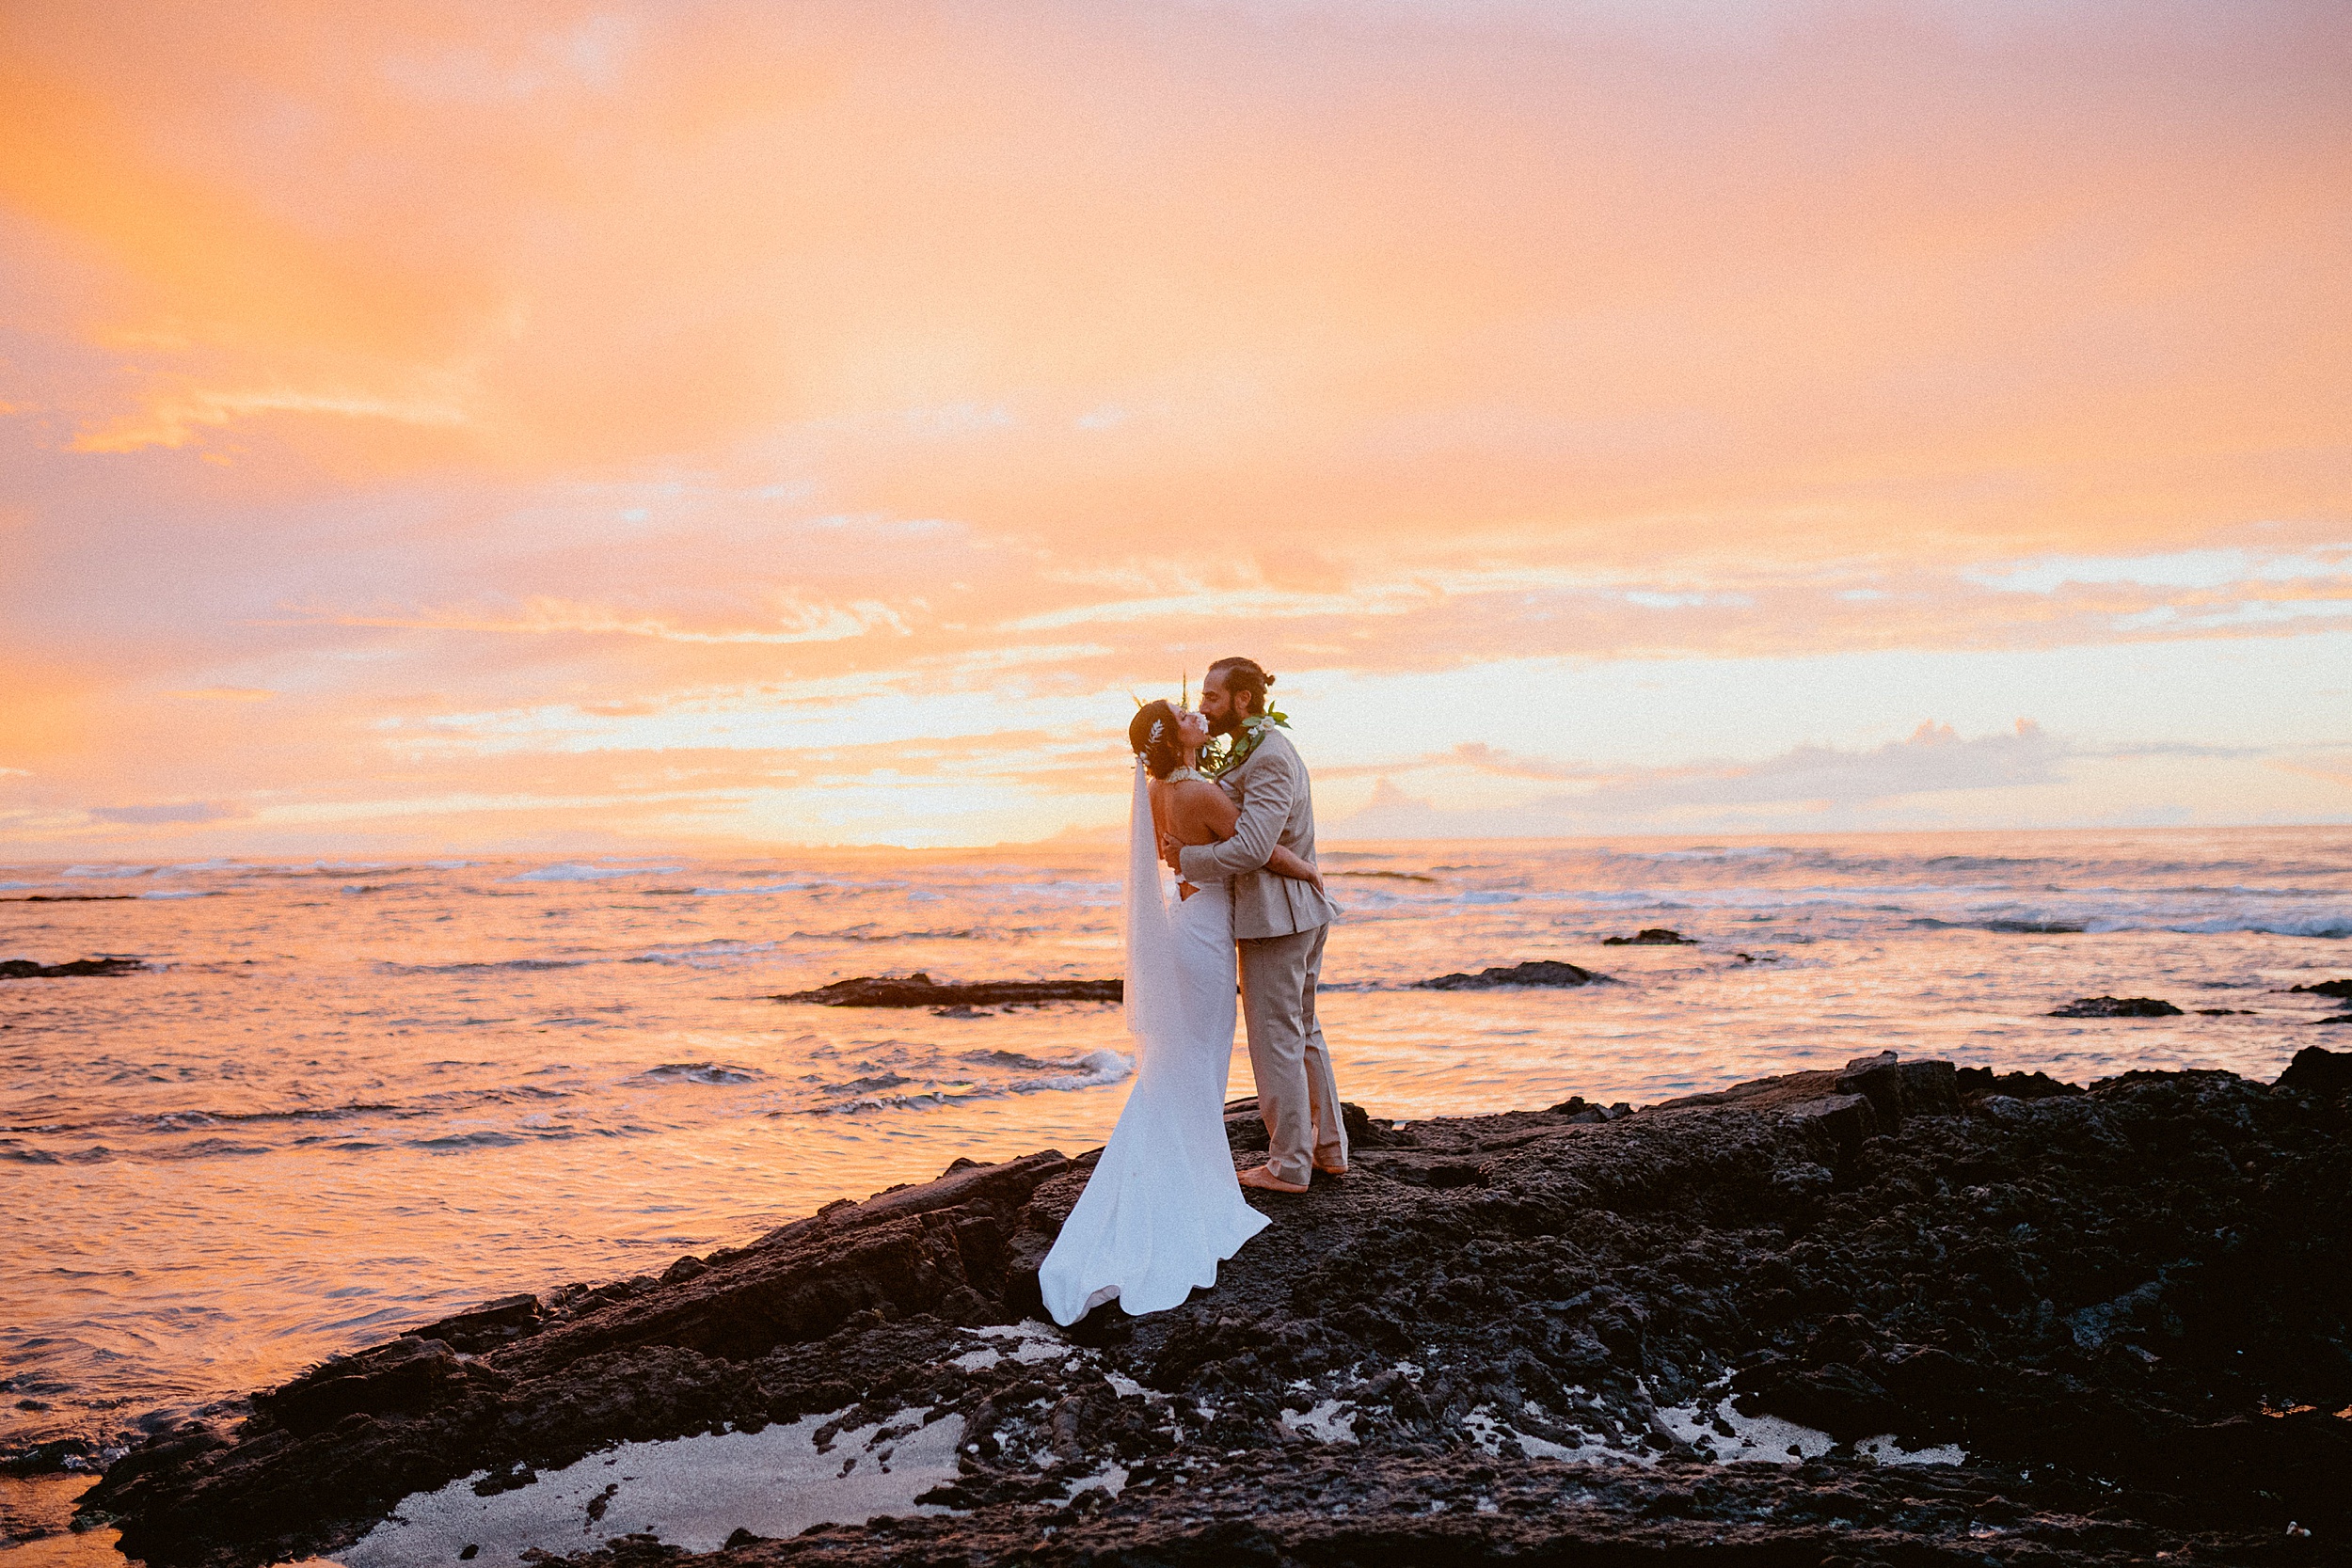 bride and groom standing together near ocean puako hawaii landscape
